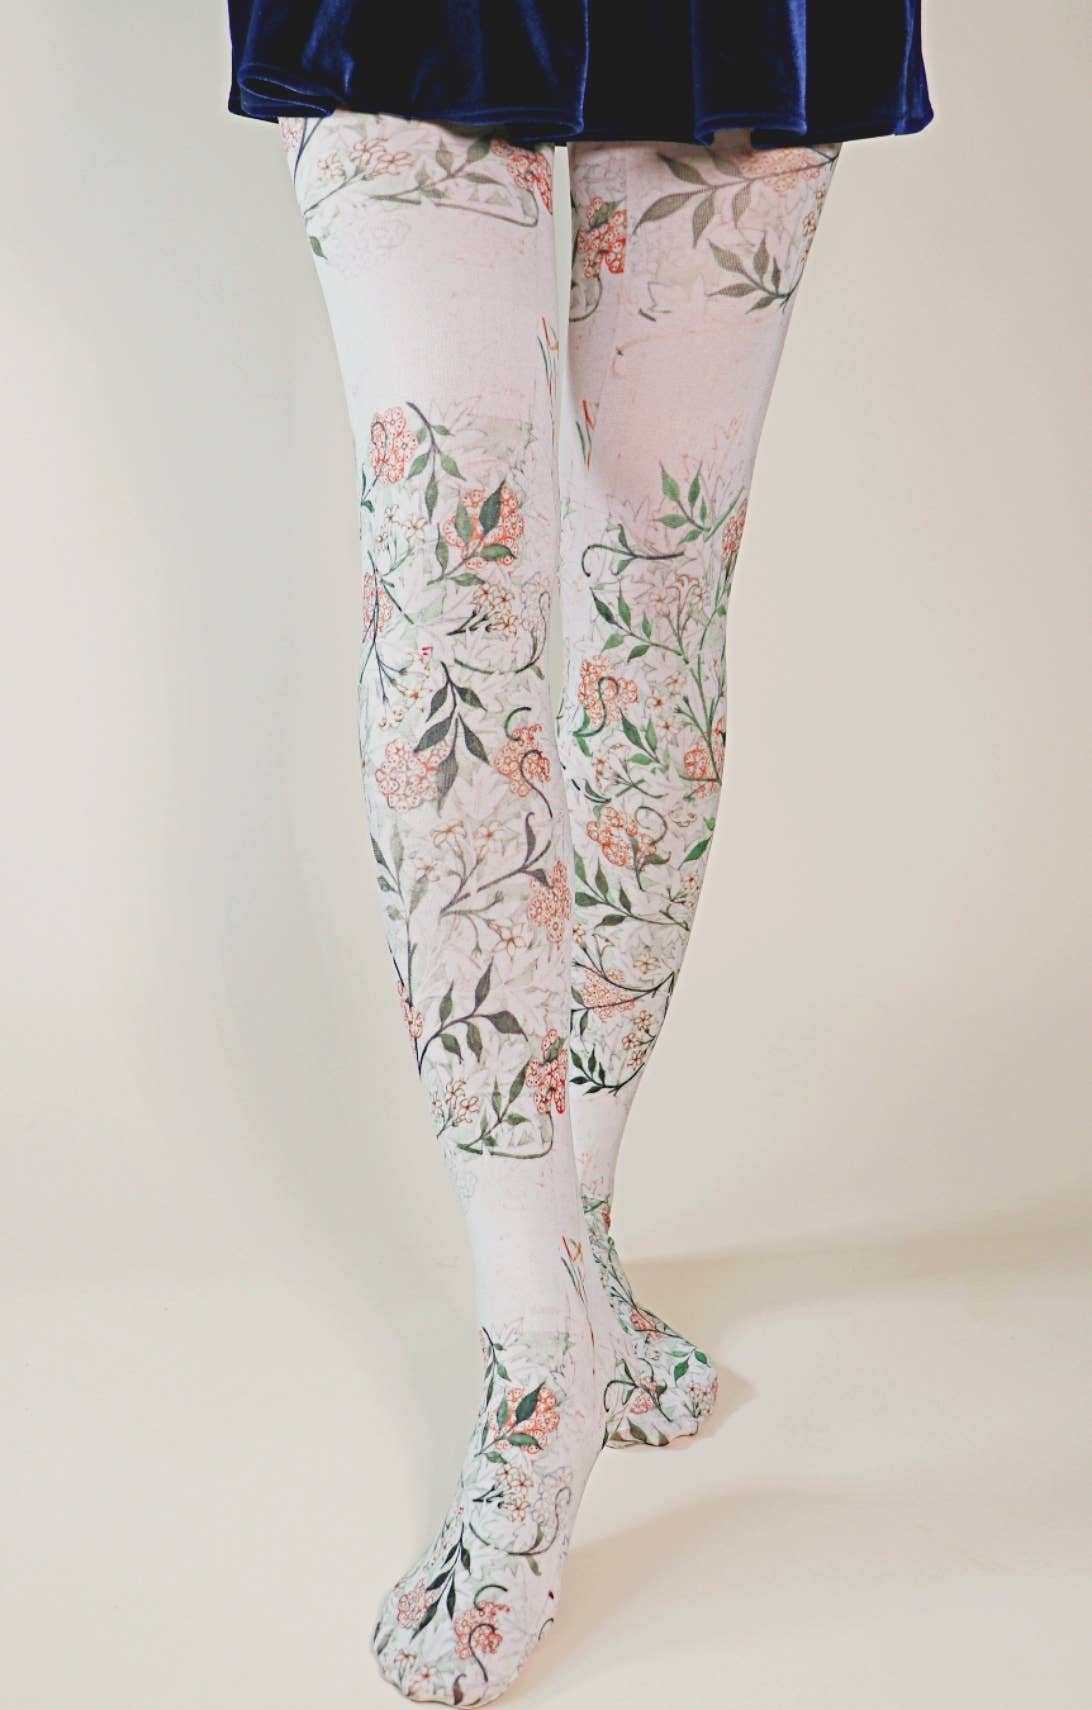 Instant Shipping! JASMINE by WILLIAM MORRIS PRINTED TIGHTS